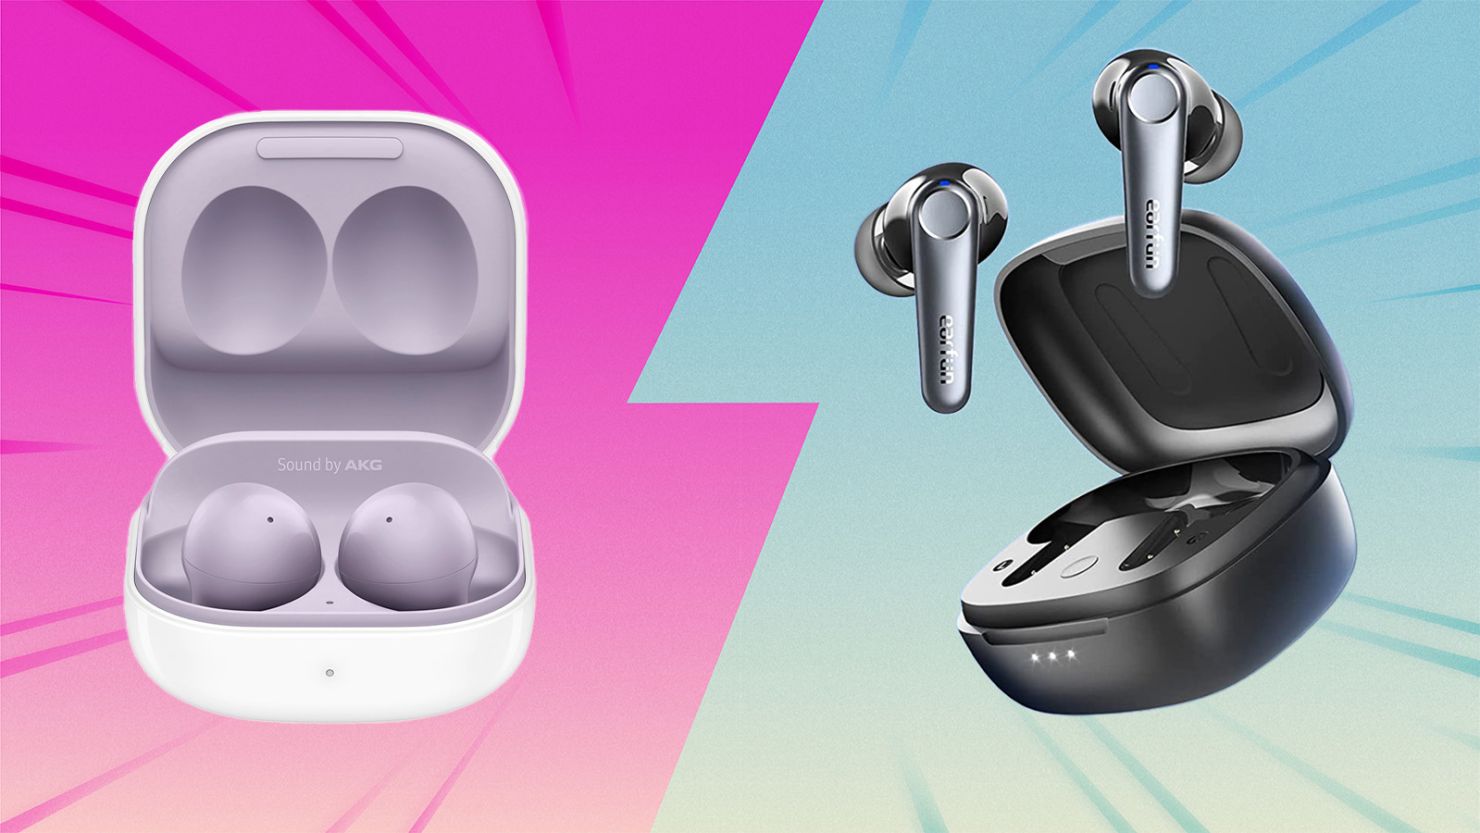 Samsung's new Galaxy Buds are surprisingly affordable